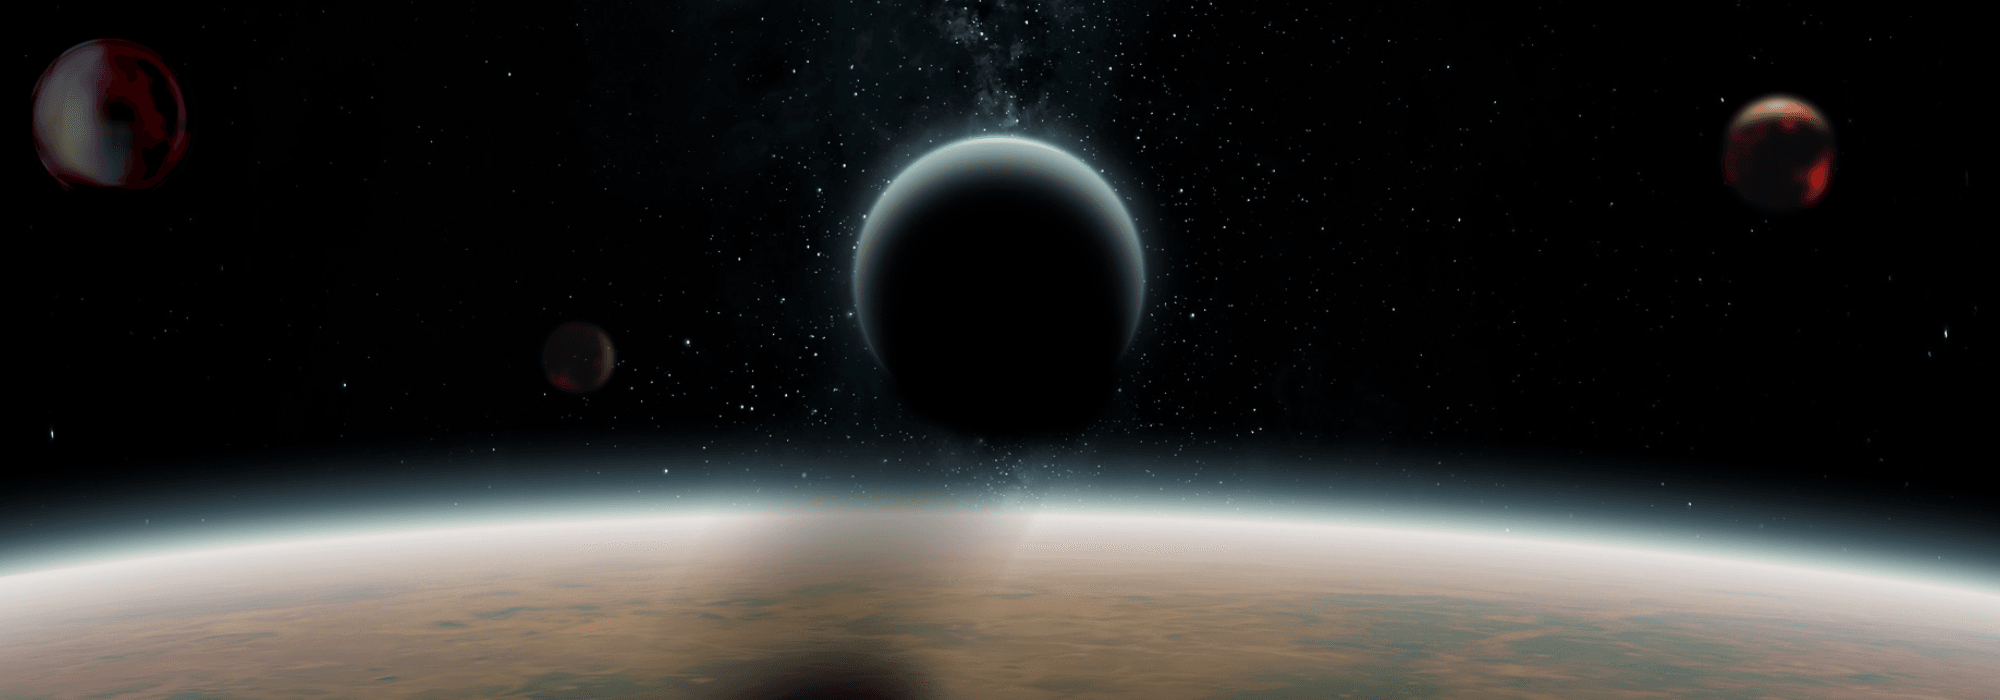 Exoplanets: The 4001 Project.